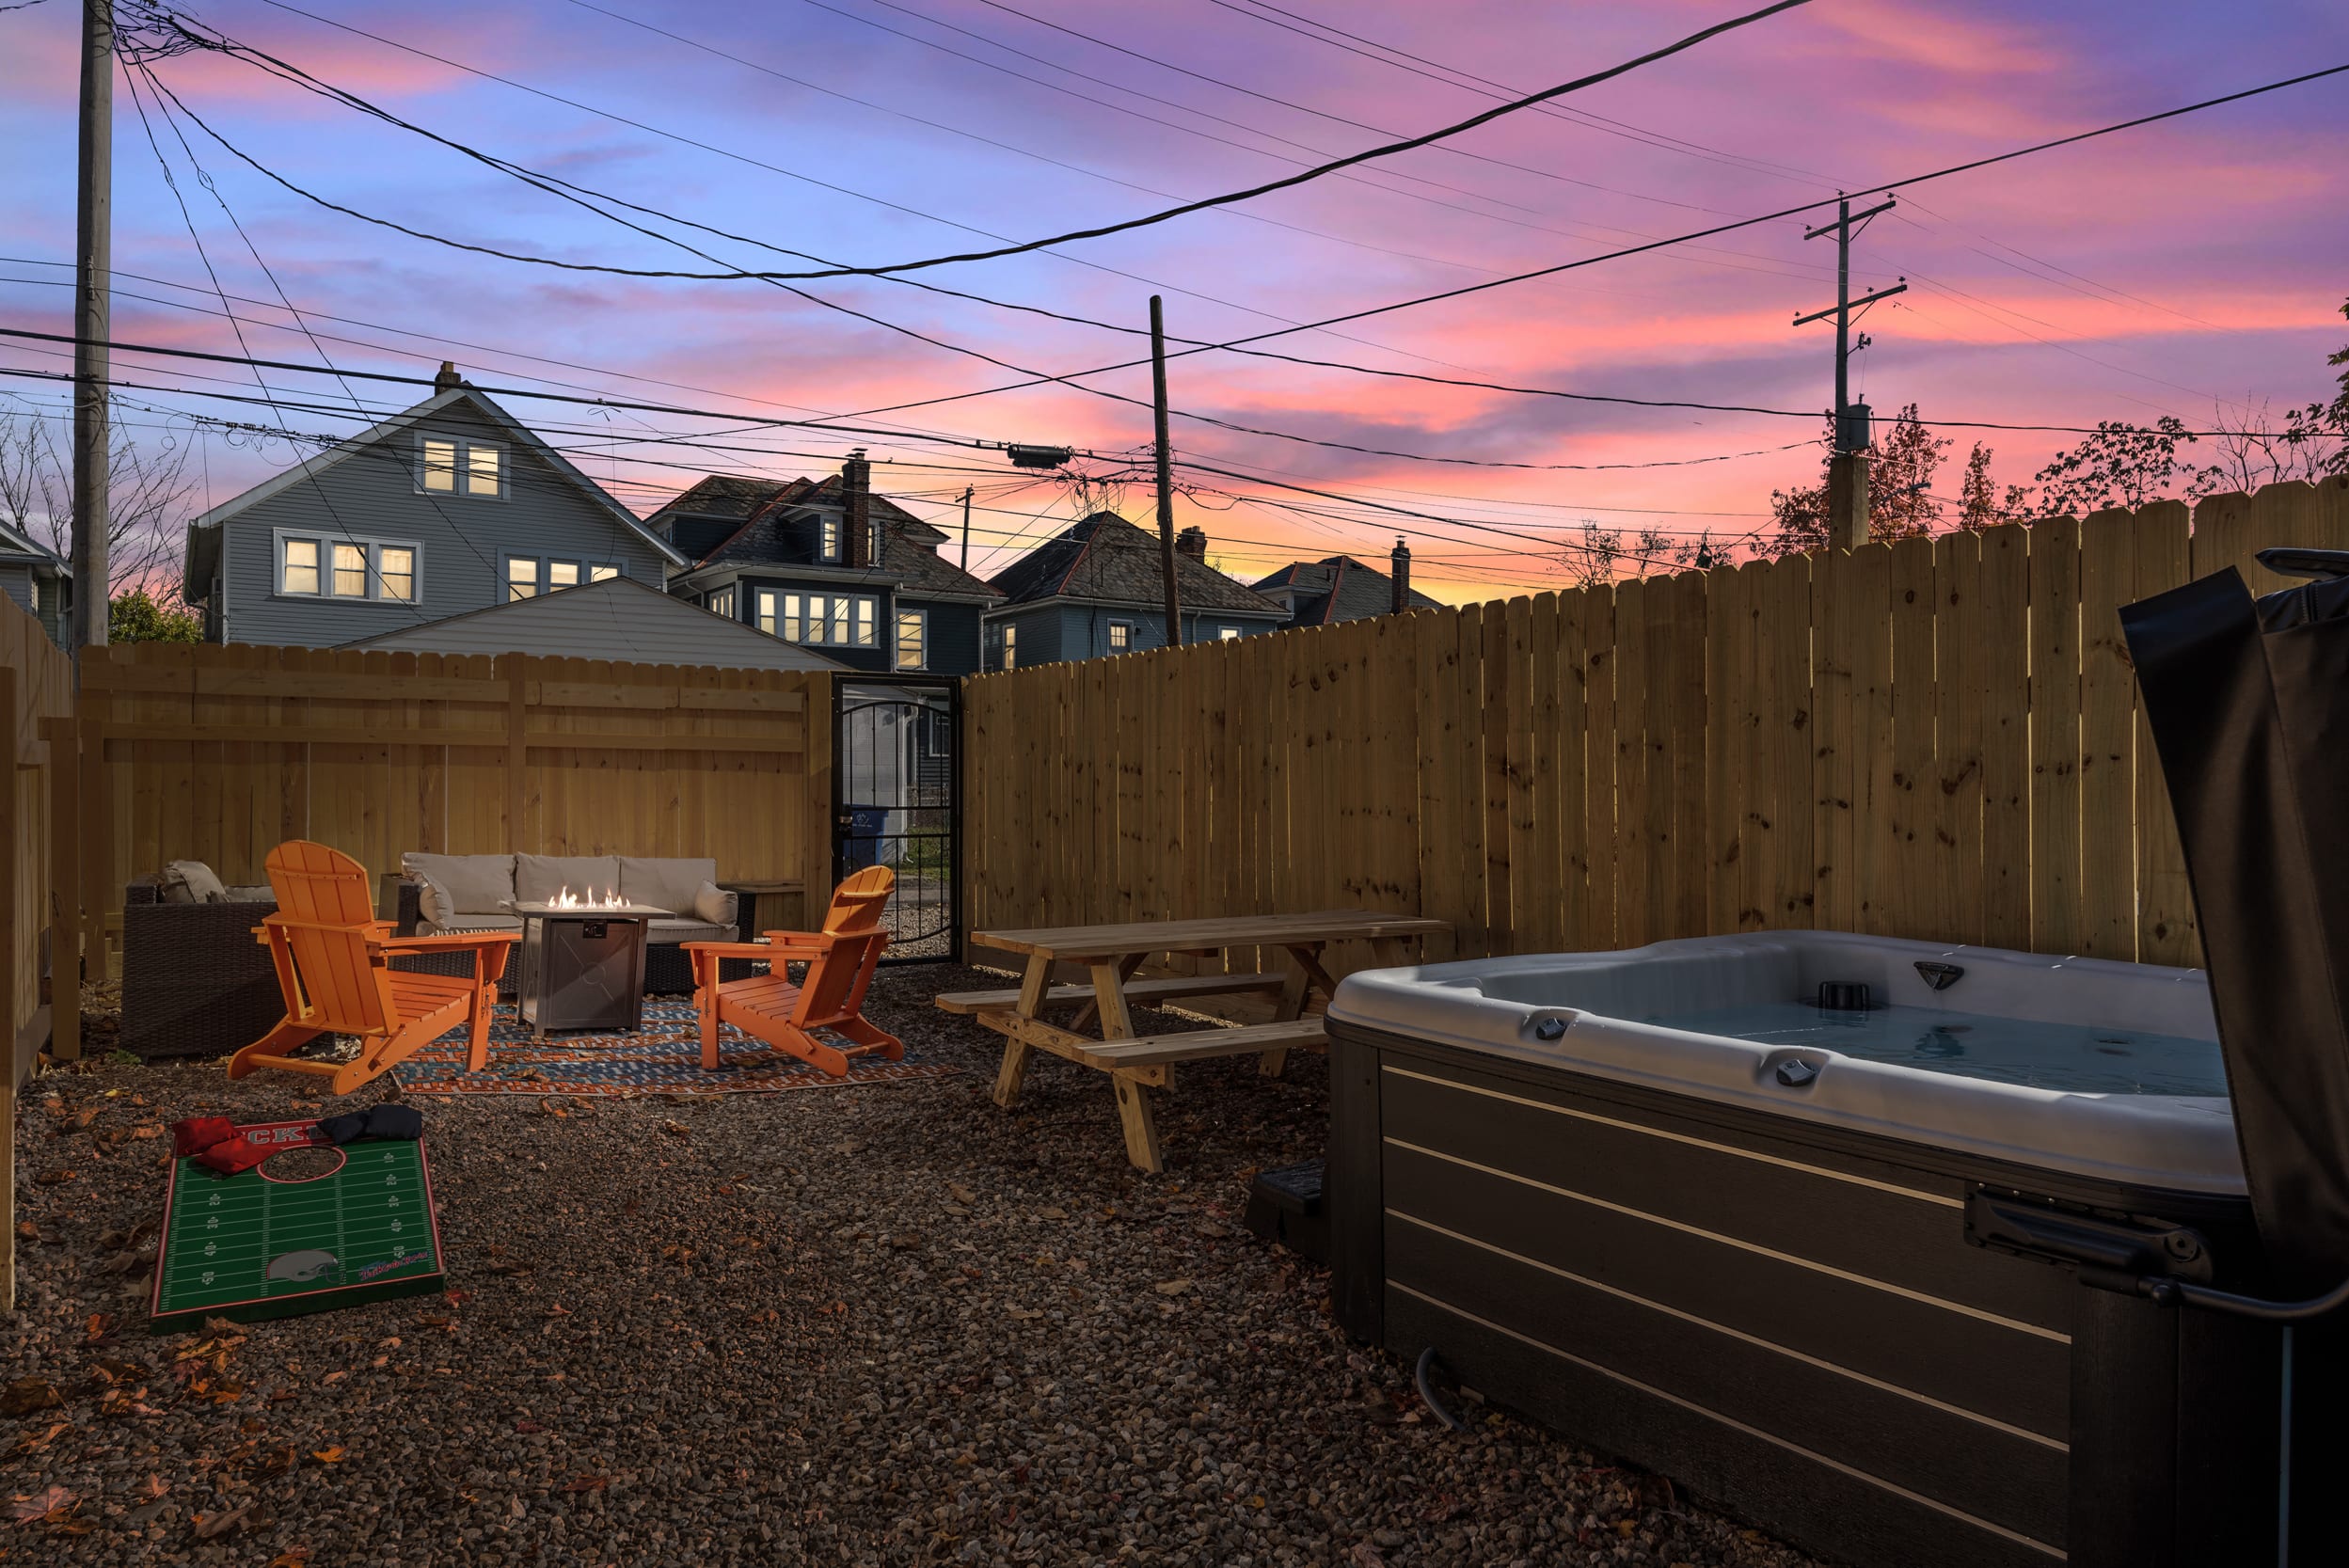 Hot tub, games, seating, cornhole- an outdoor oasis!